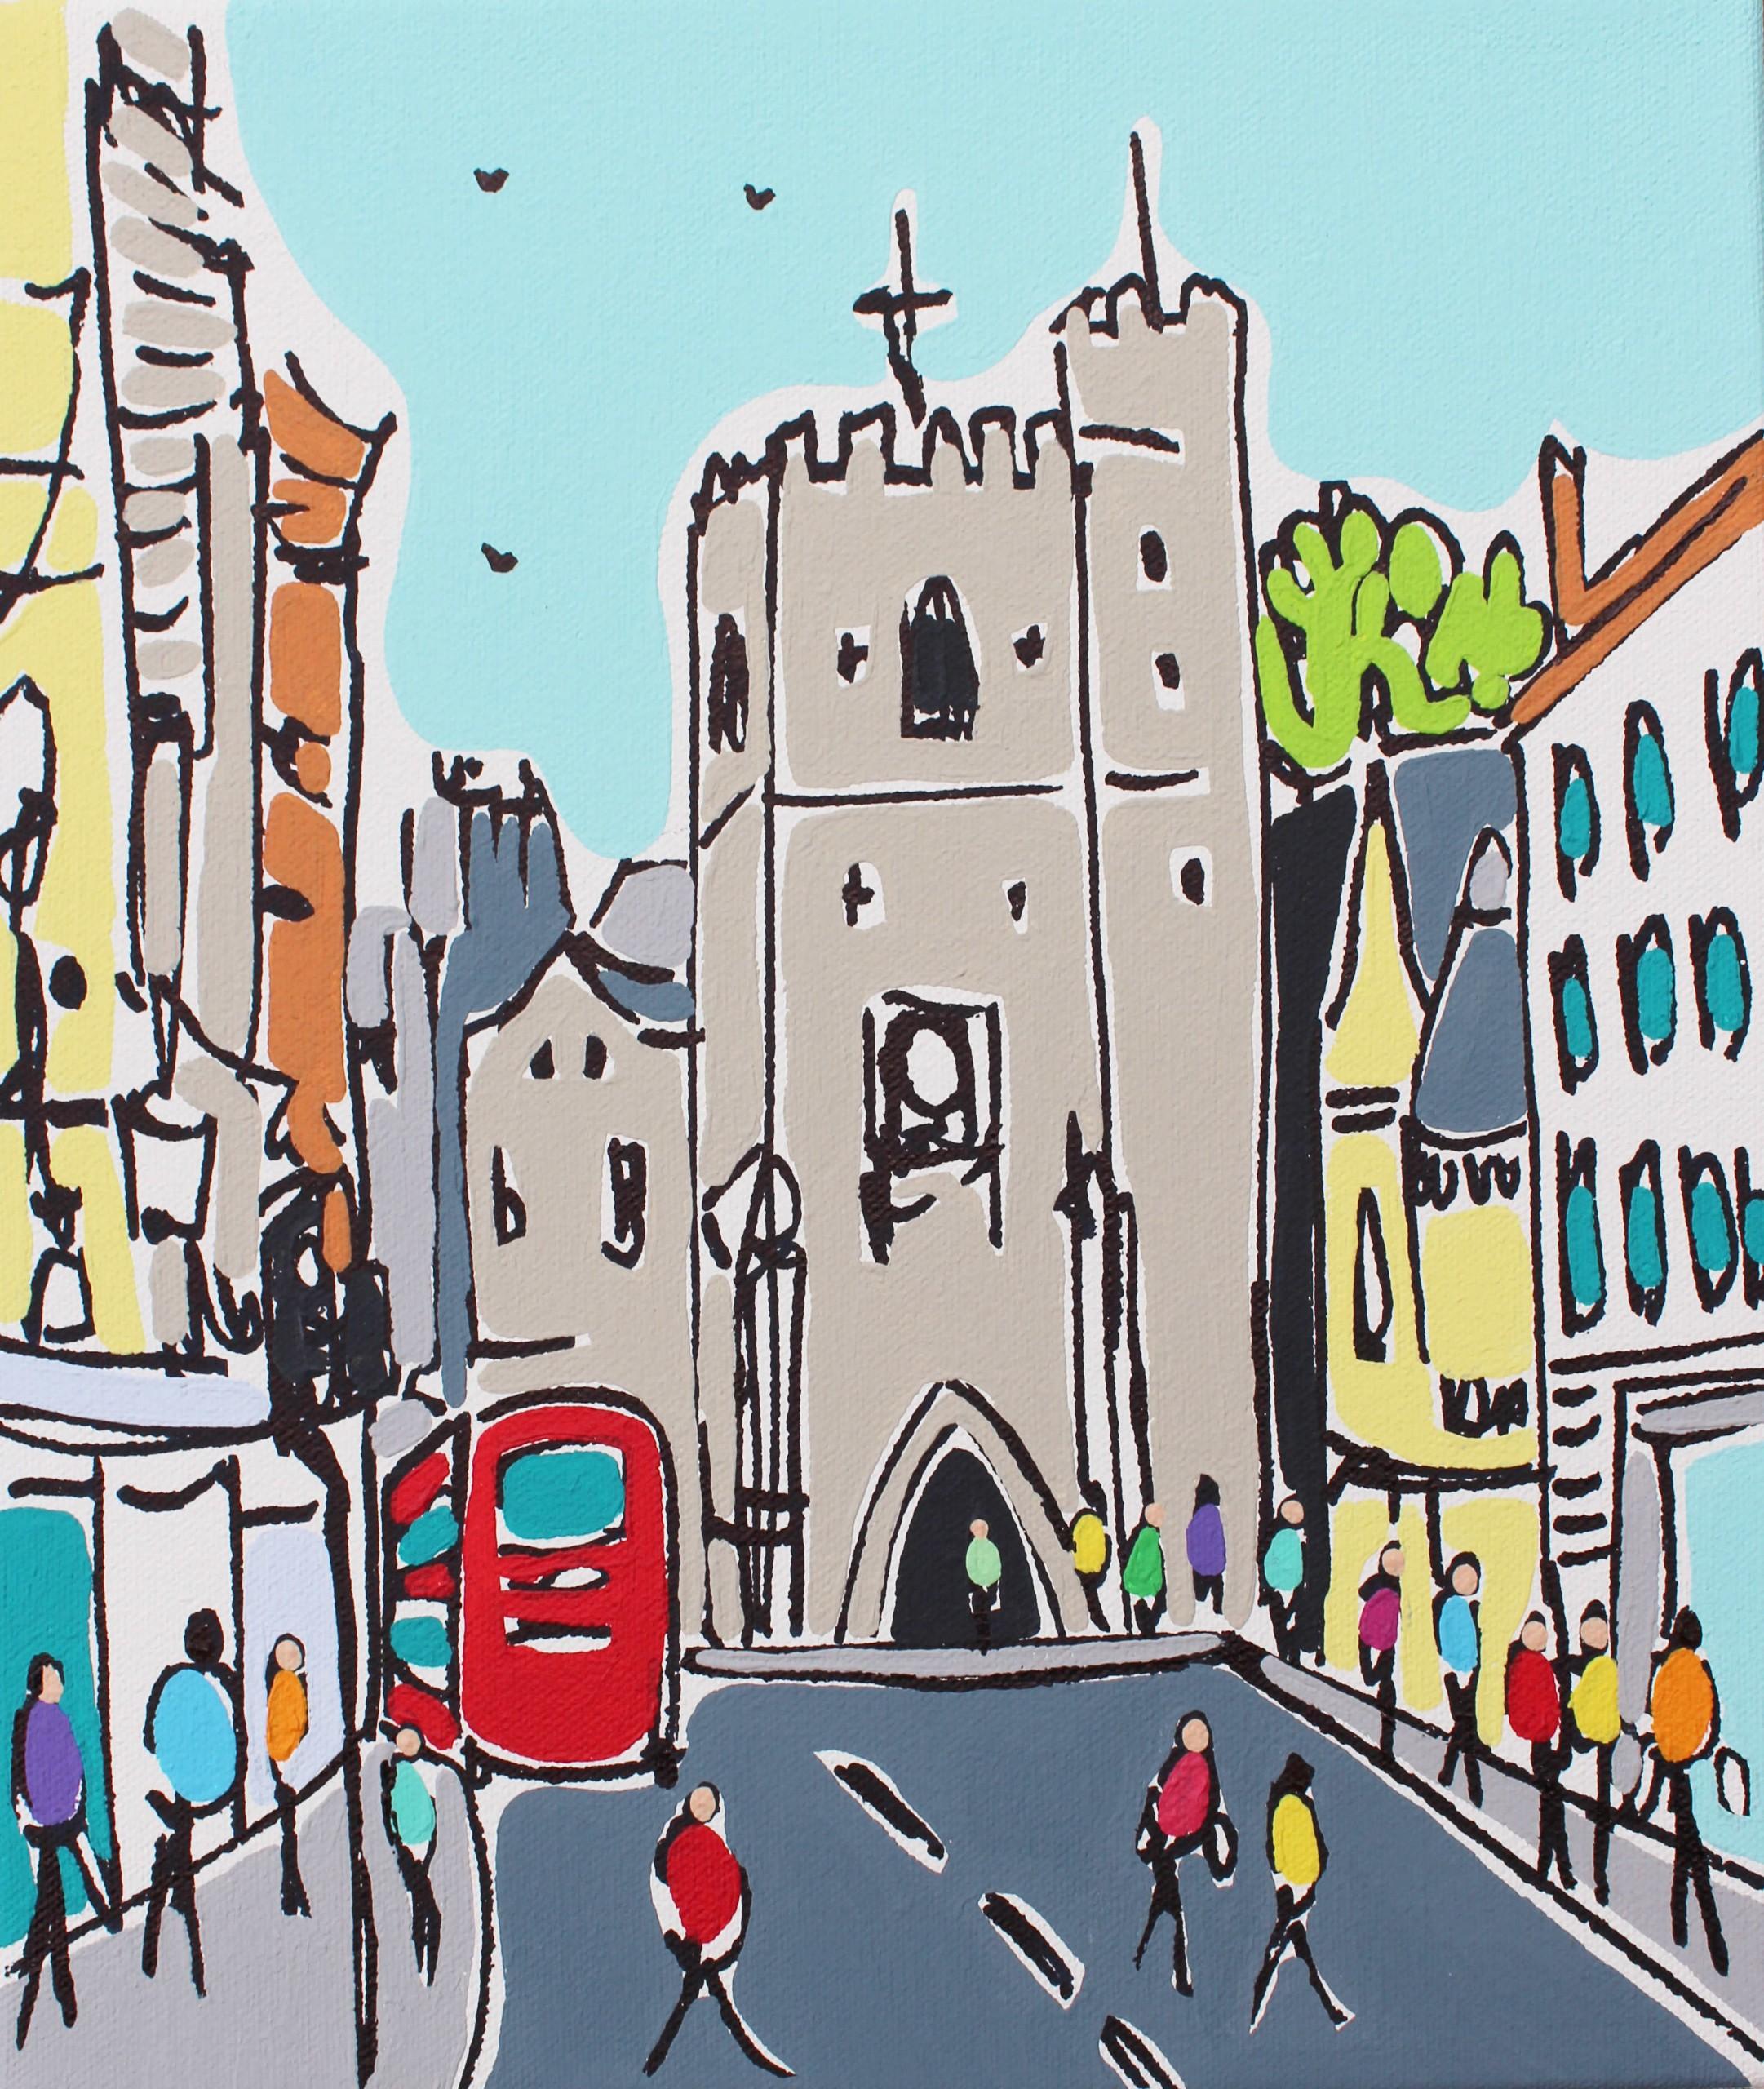 Mini Oxford Centre by Rachel Tighe [2022]
original and hand signed by the artist 
Acrylic on Canvas
Image size: H:30 cm x W:25 cm
Complete Size of Unframed Work: H:30 cm x W:25 cm x D:4cm
Sold Unframed
Please note that insitu images are purely an